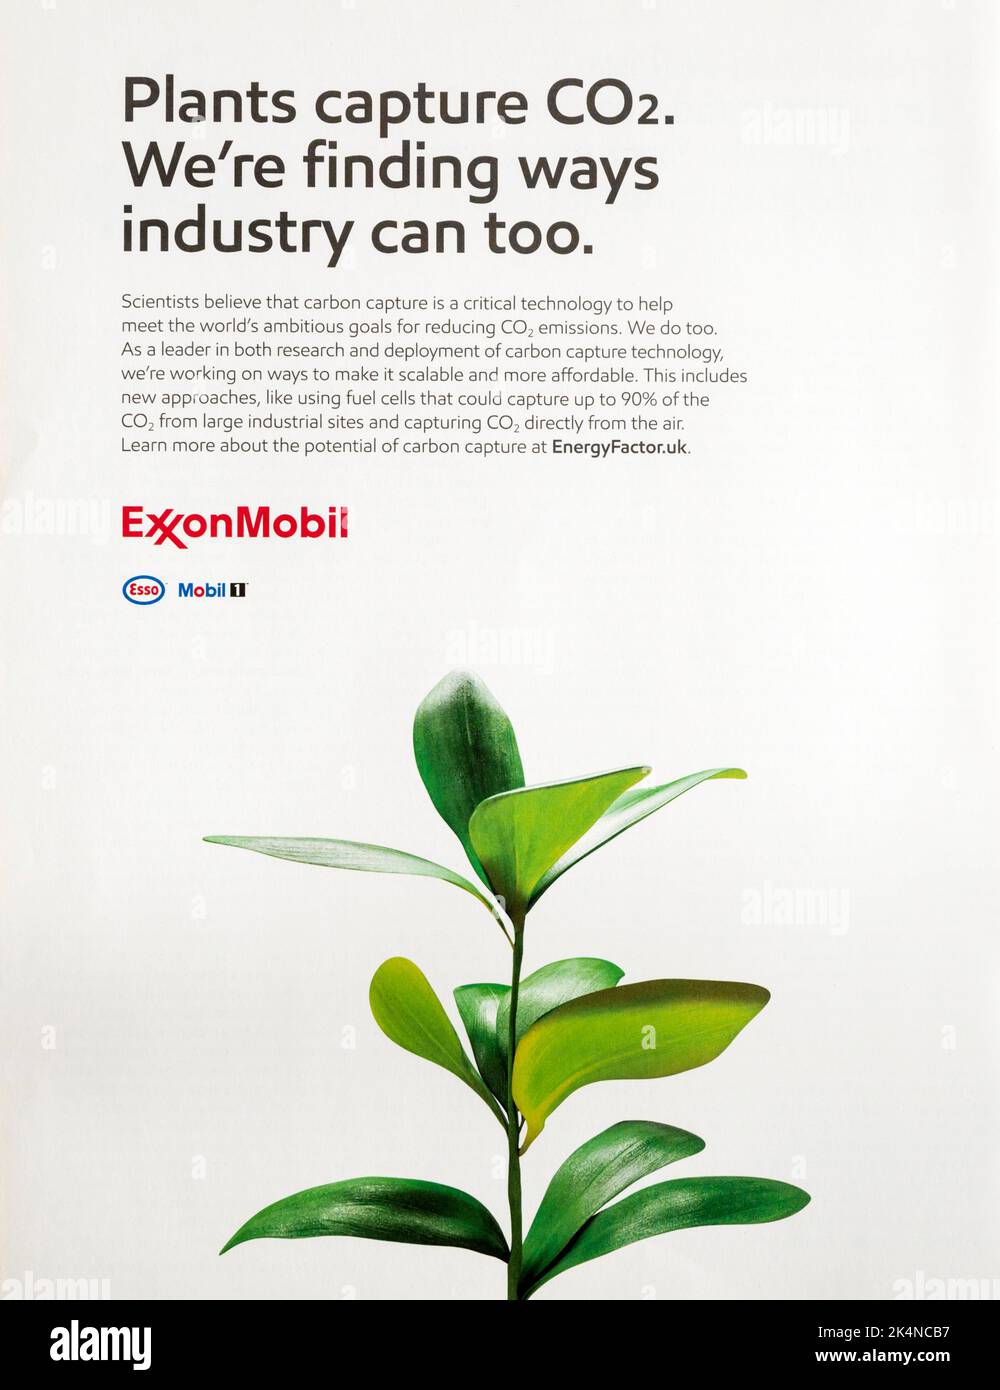 An Exxon Mobil advertisement promoting carbon capture as a means of reducing CO2 emissions. Stock Photo